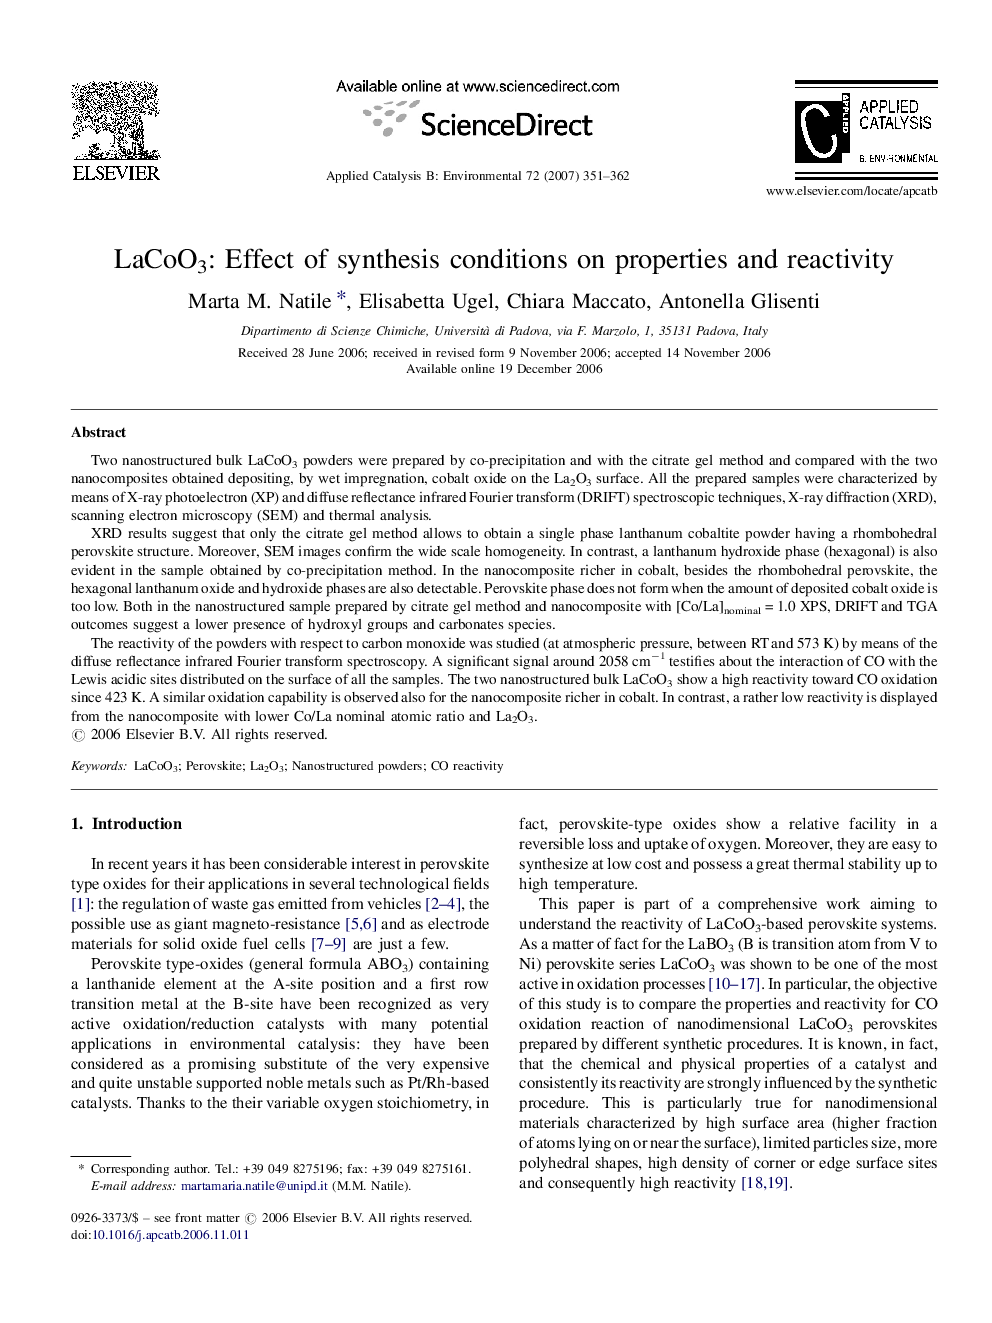 LaCoO3: Effect of synthesis conditions on properties and reactivity